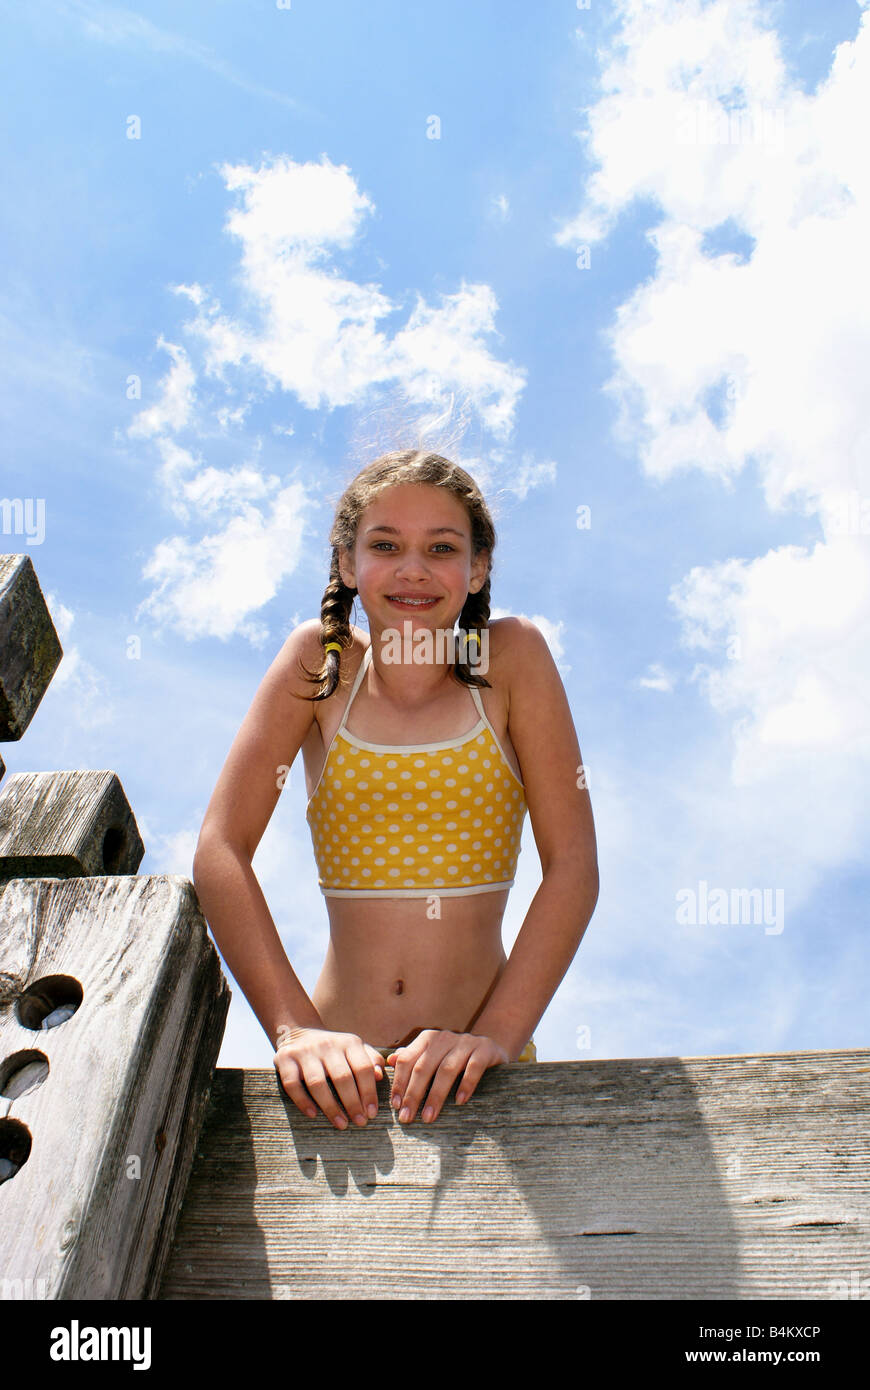 On Top Of It All Stock Photo - Alamy